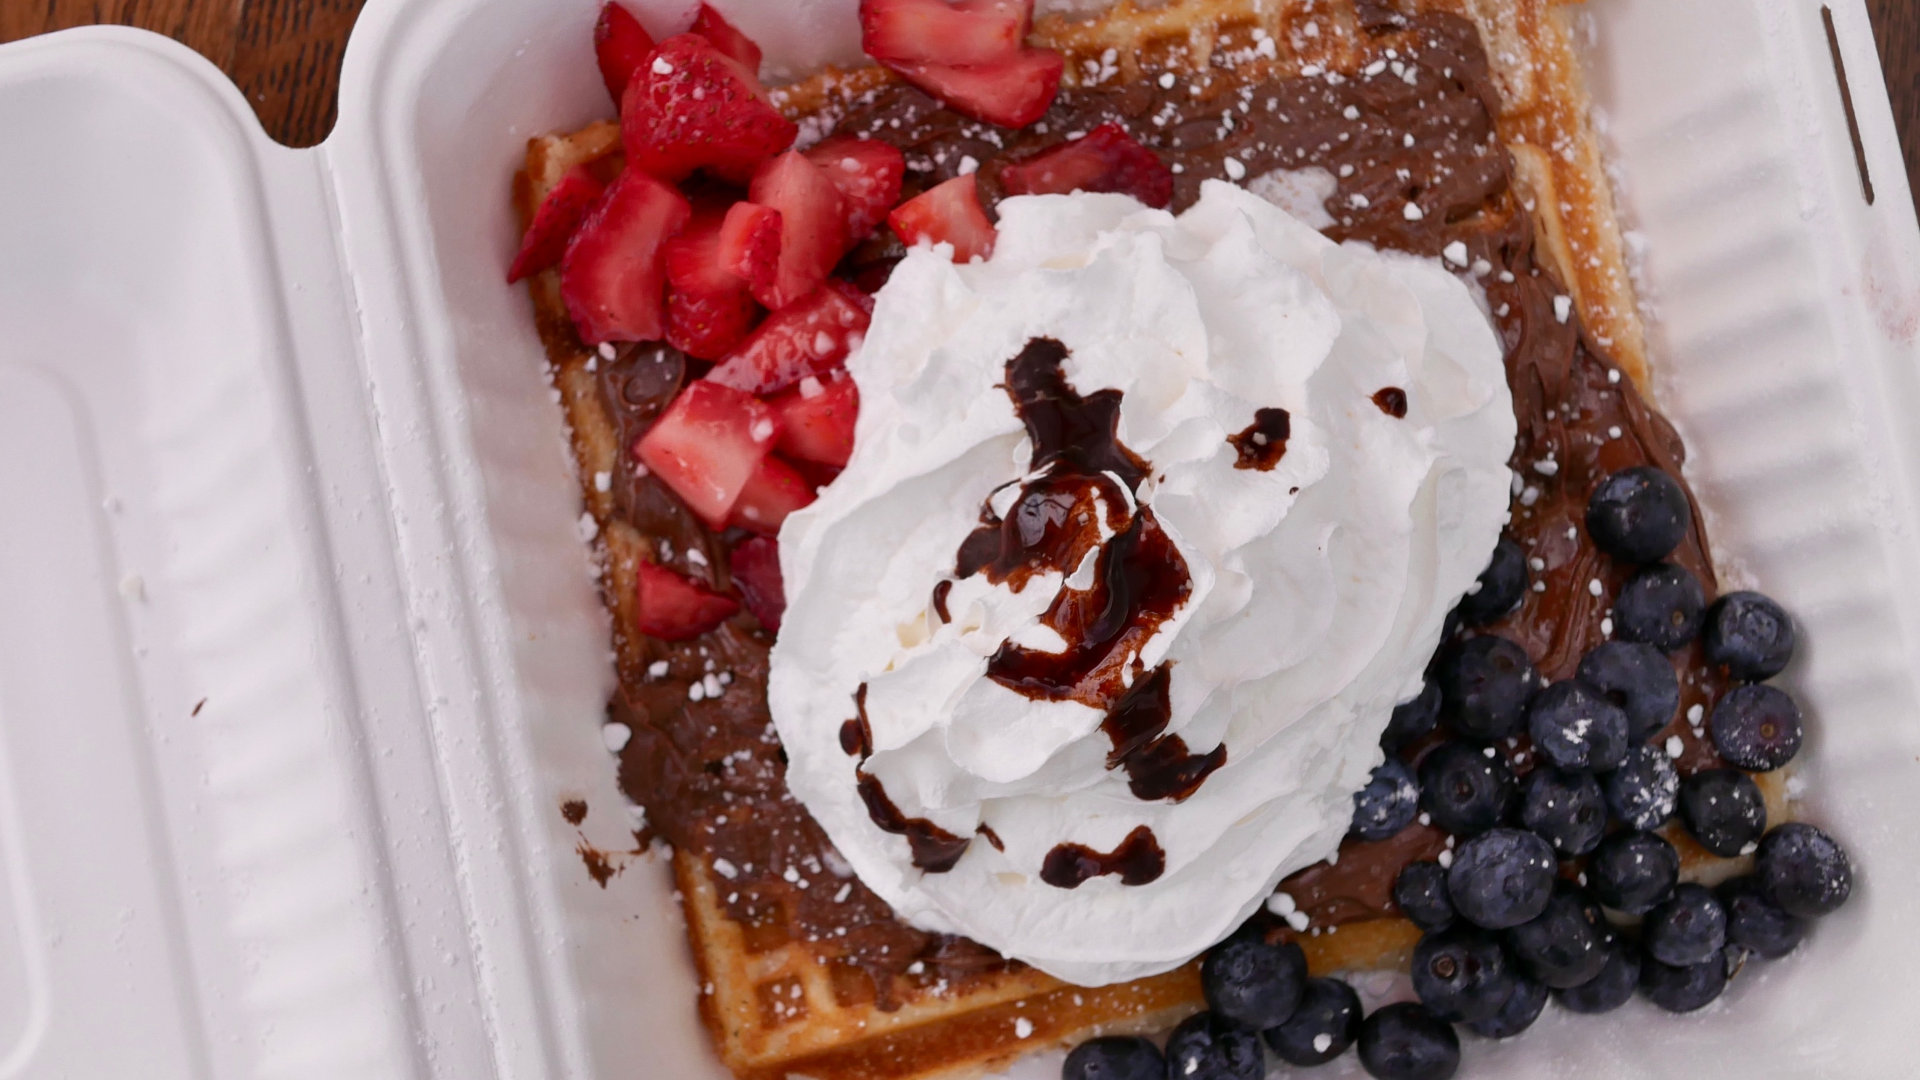 The Spot on Avalon Way serves decadent waffles and delish coffee drinks.